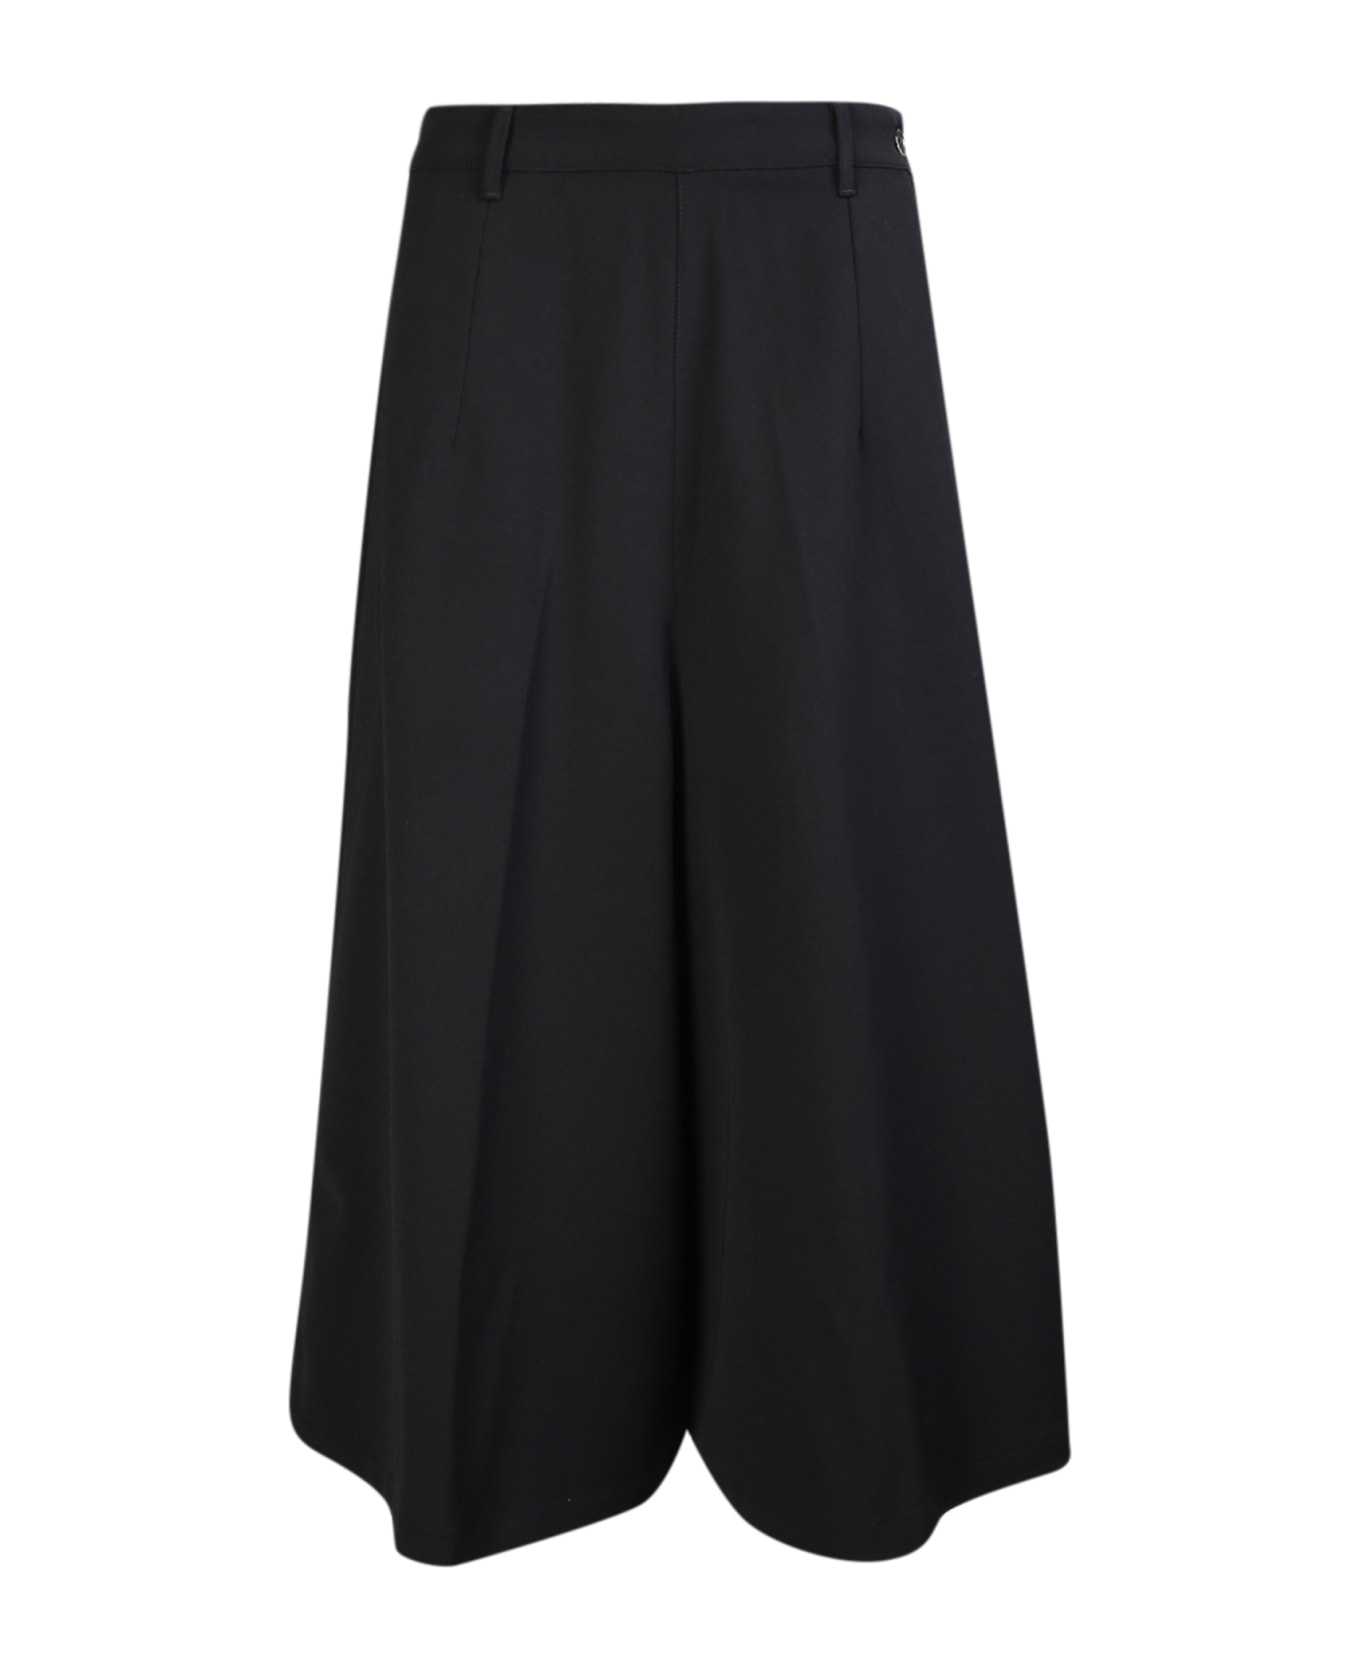 Nine in the Morning Black Cady Culotte Trousers - Black ボトムス